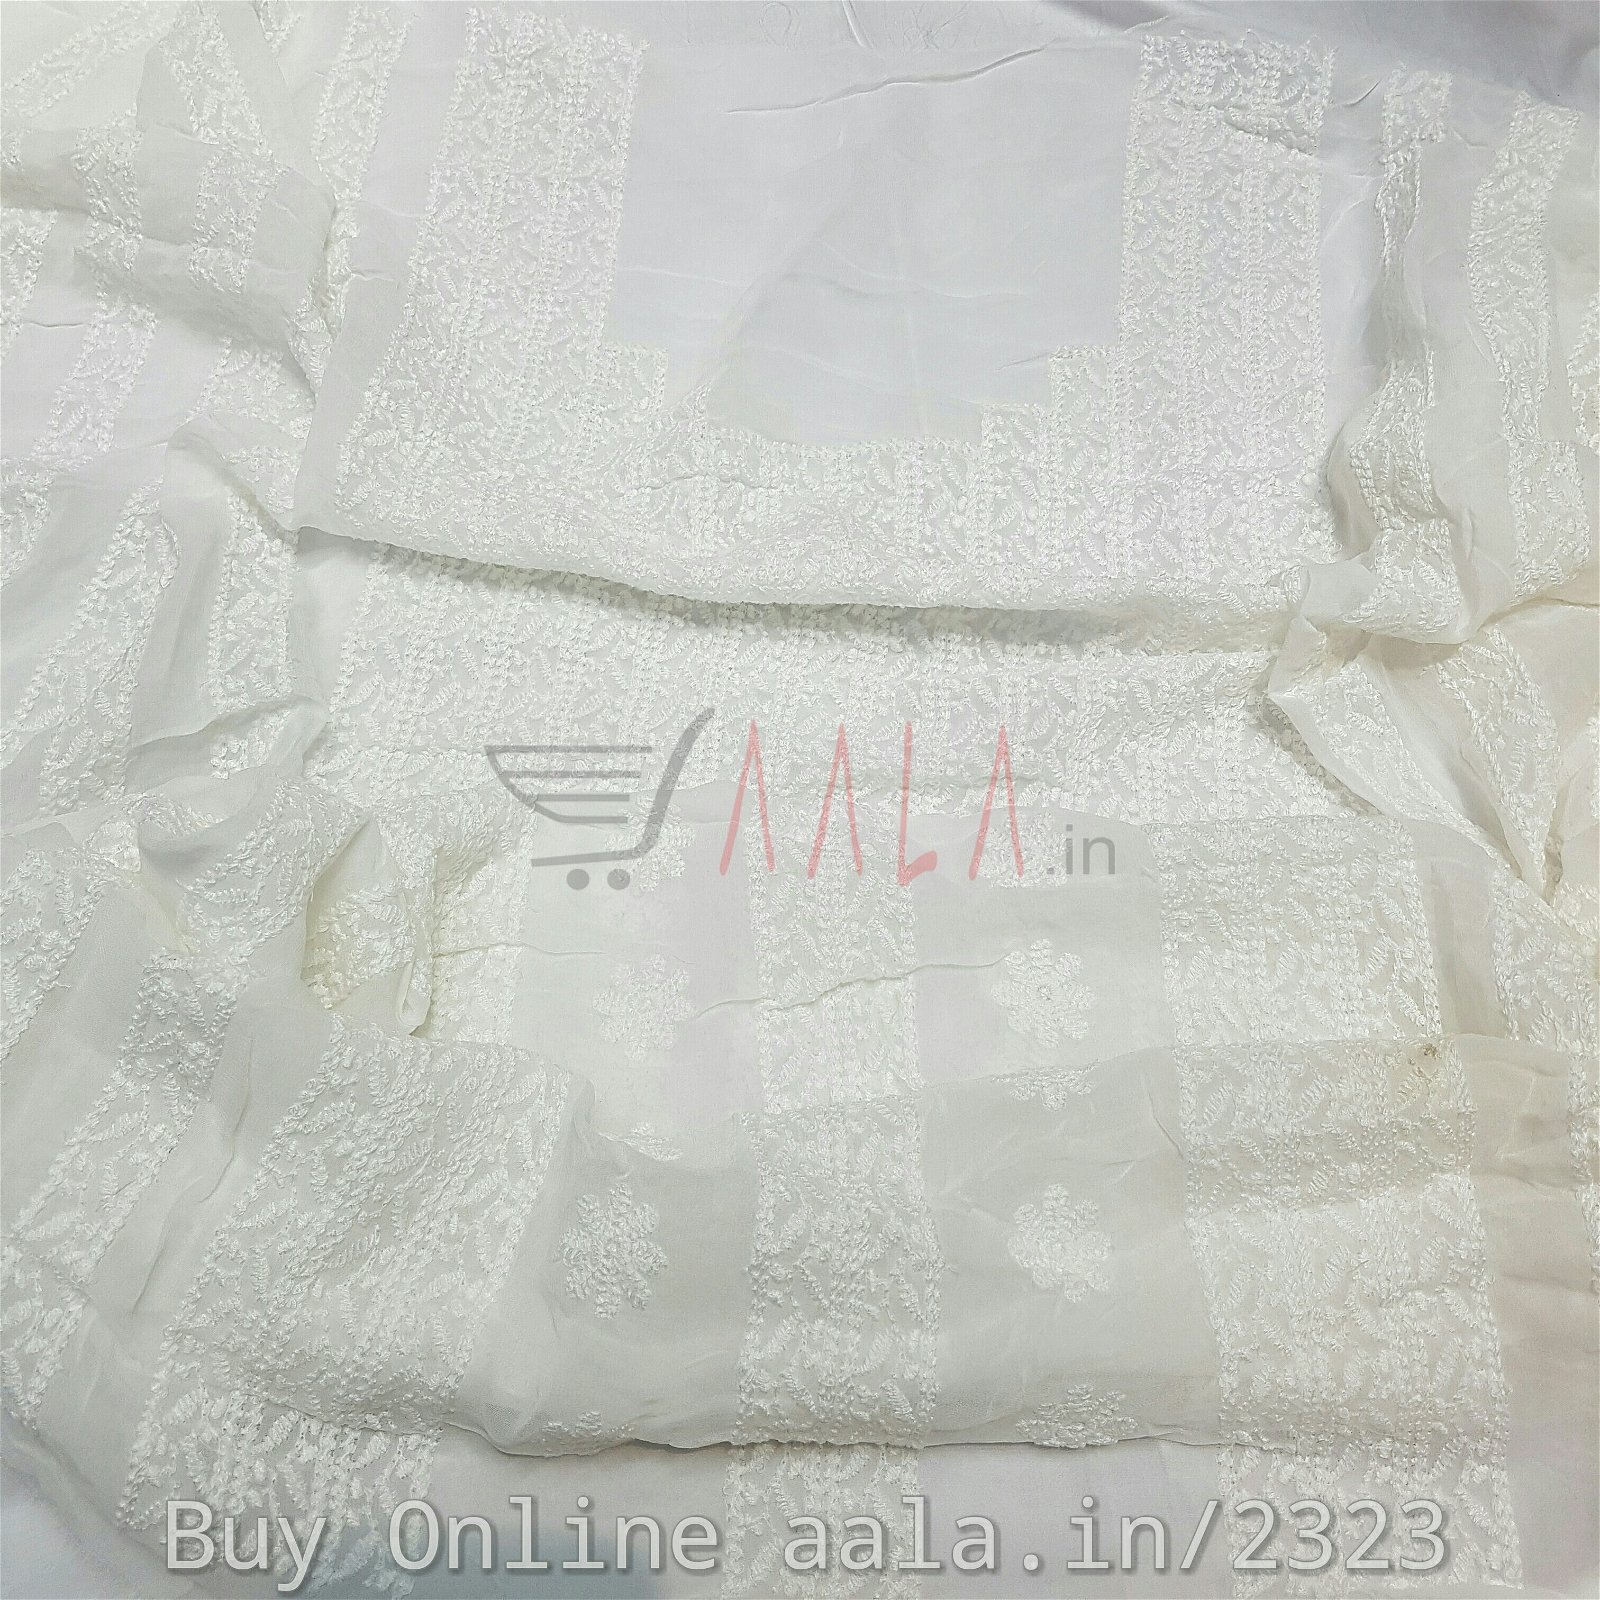 Embroidered Karachi Georgette Viscose 44 Inches Dyeable 1.25 Metres #2323